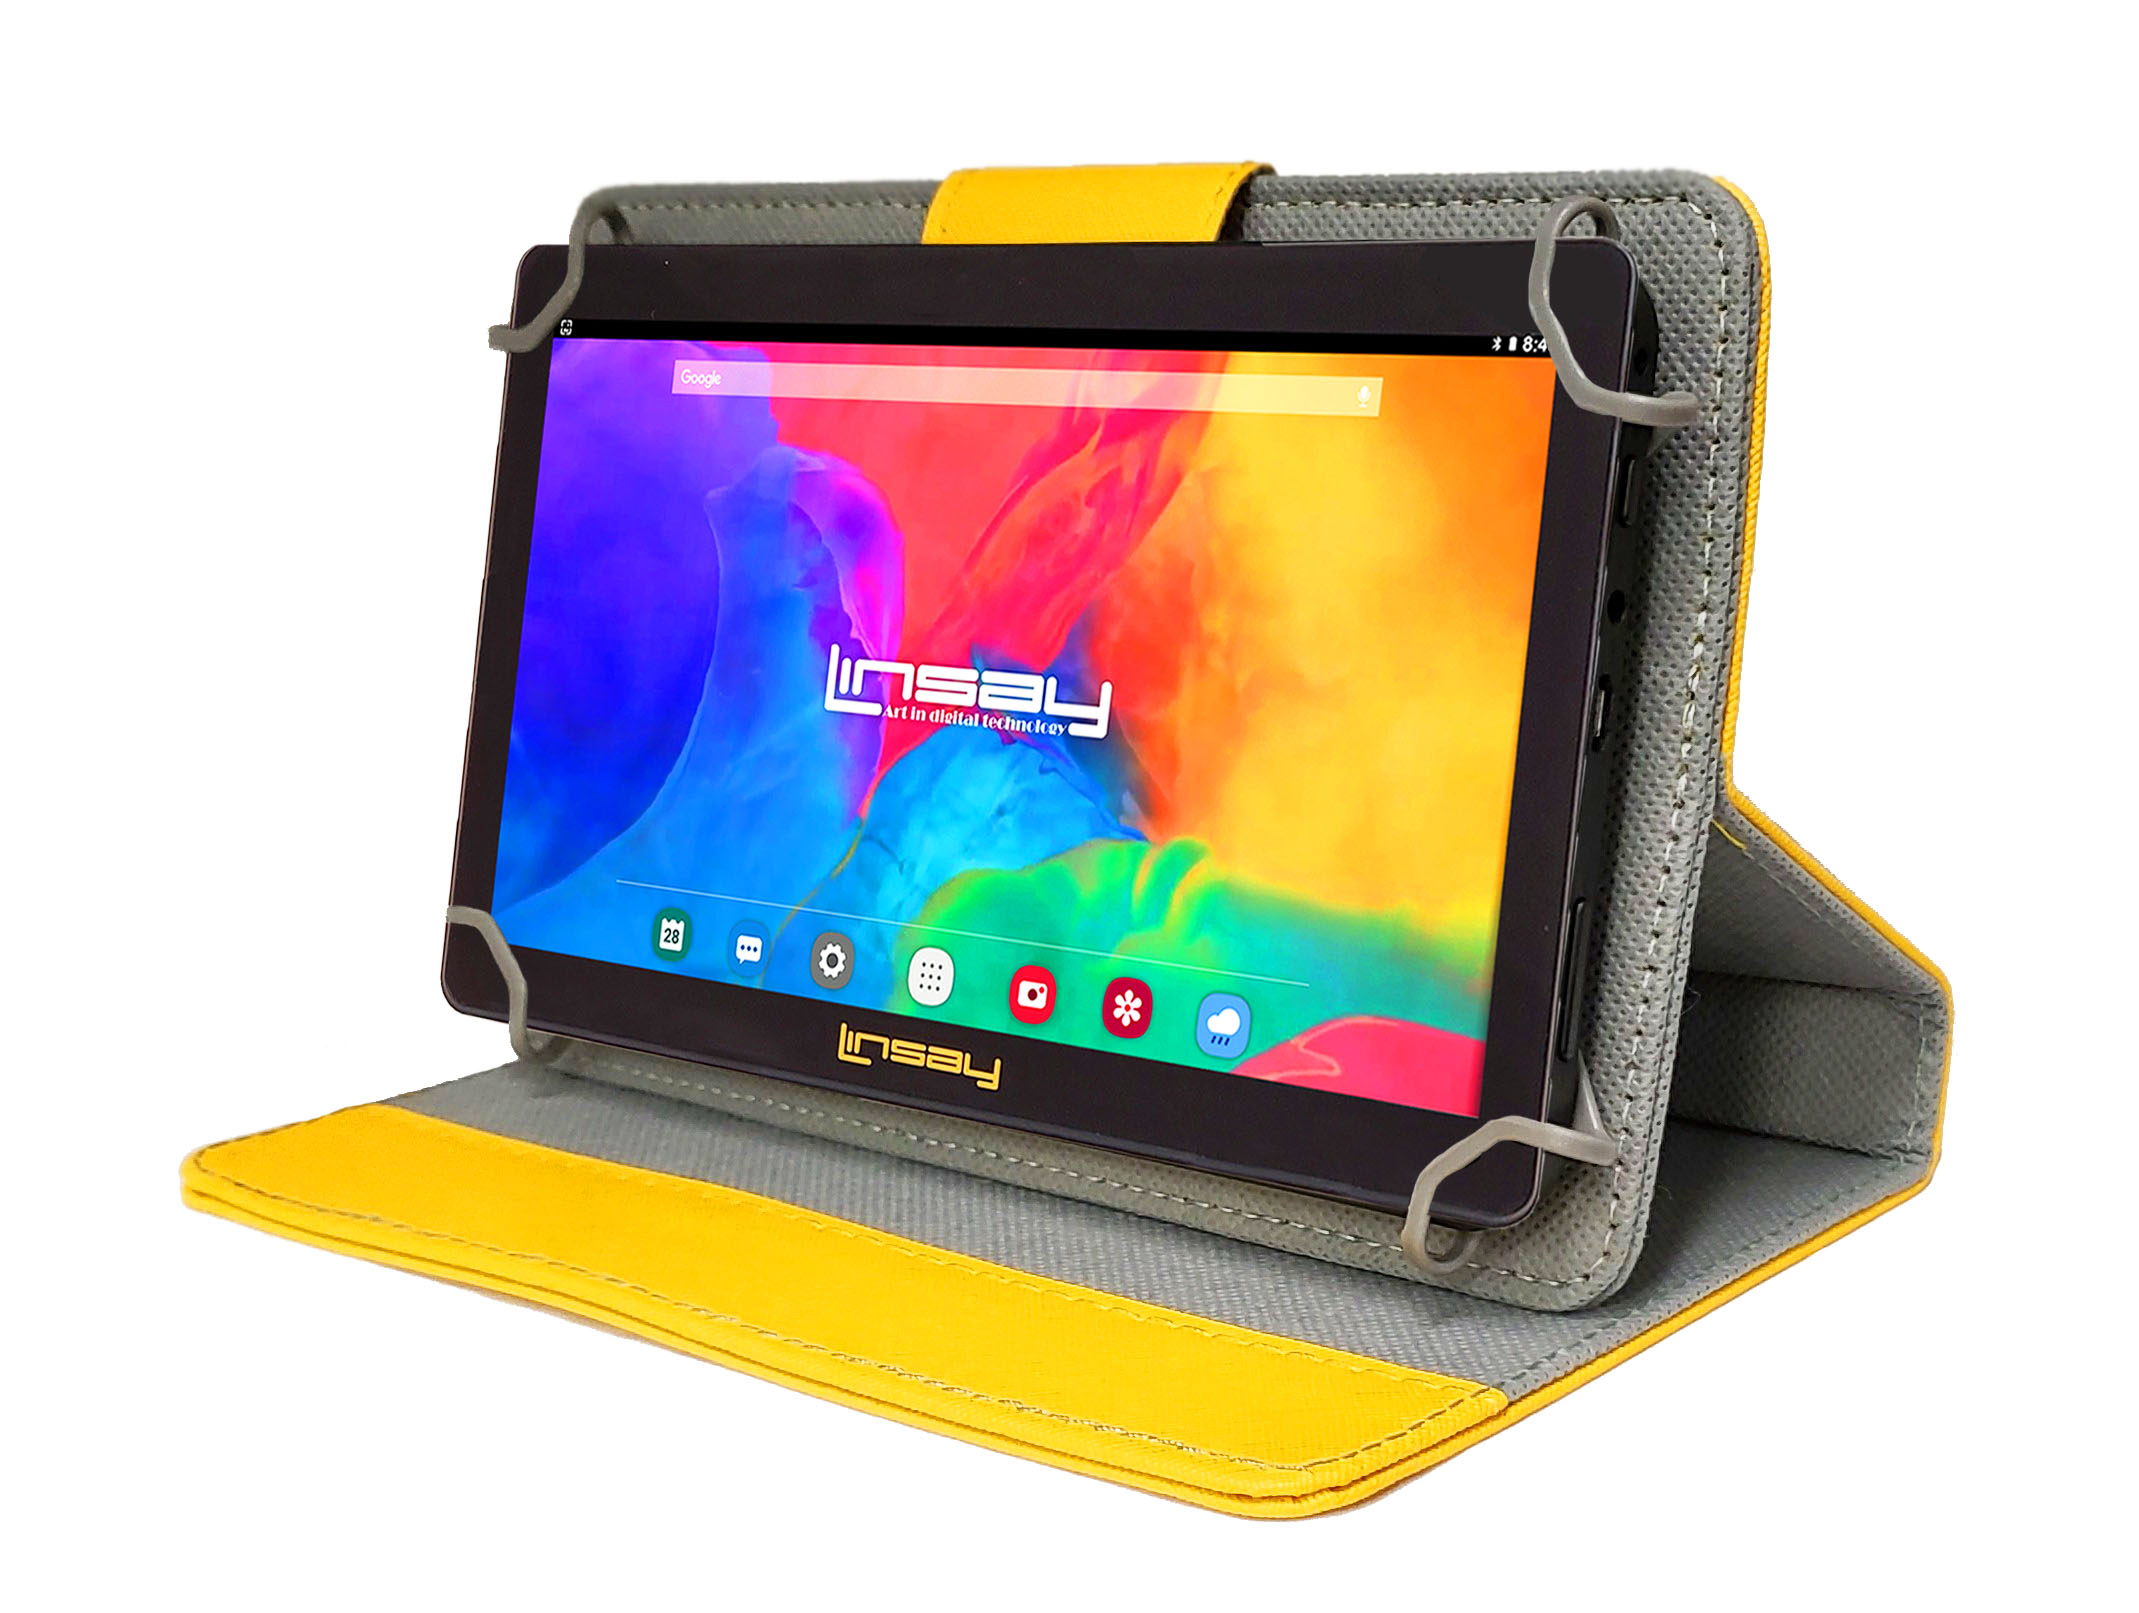 LINSAY 7" Quad Core 2GB RAM 32GB Storage Android 12 WiFi Tablet with case Yellow Leather Case - image 2 of 3